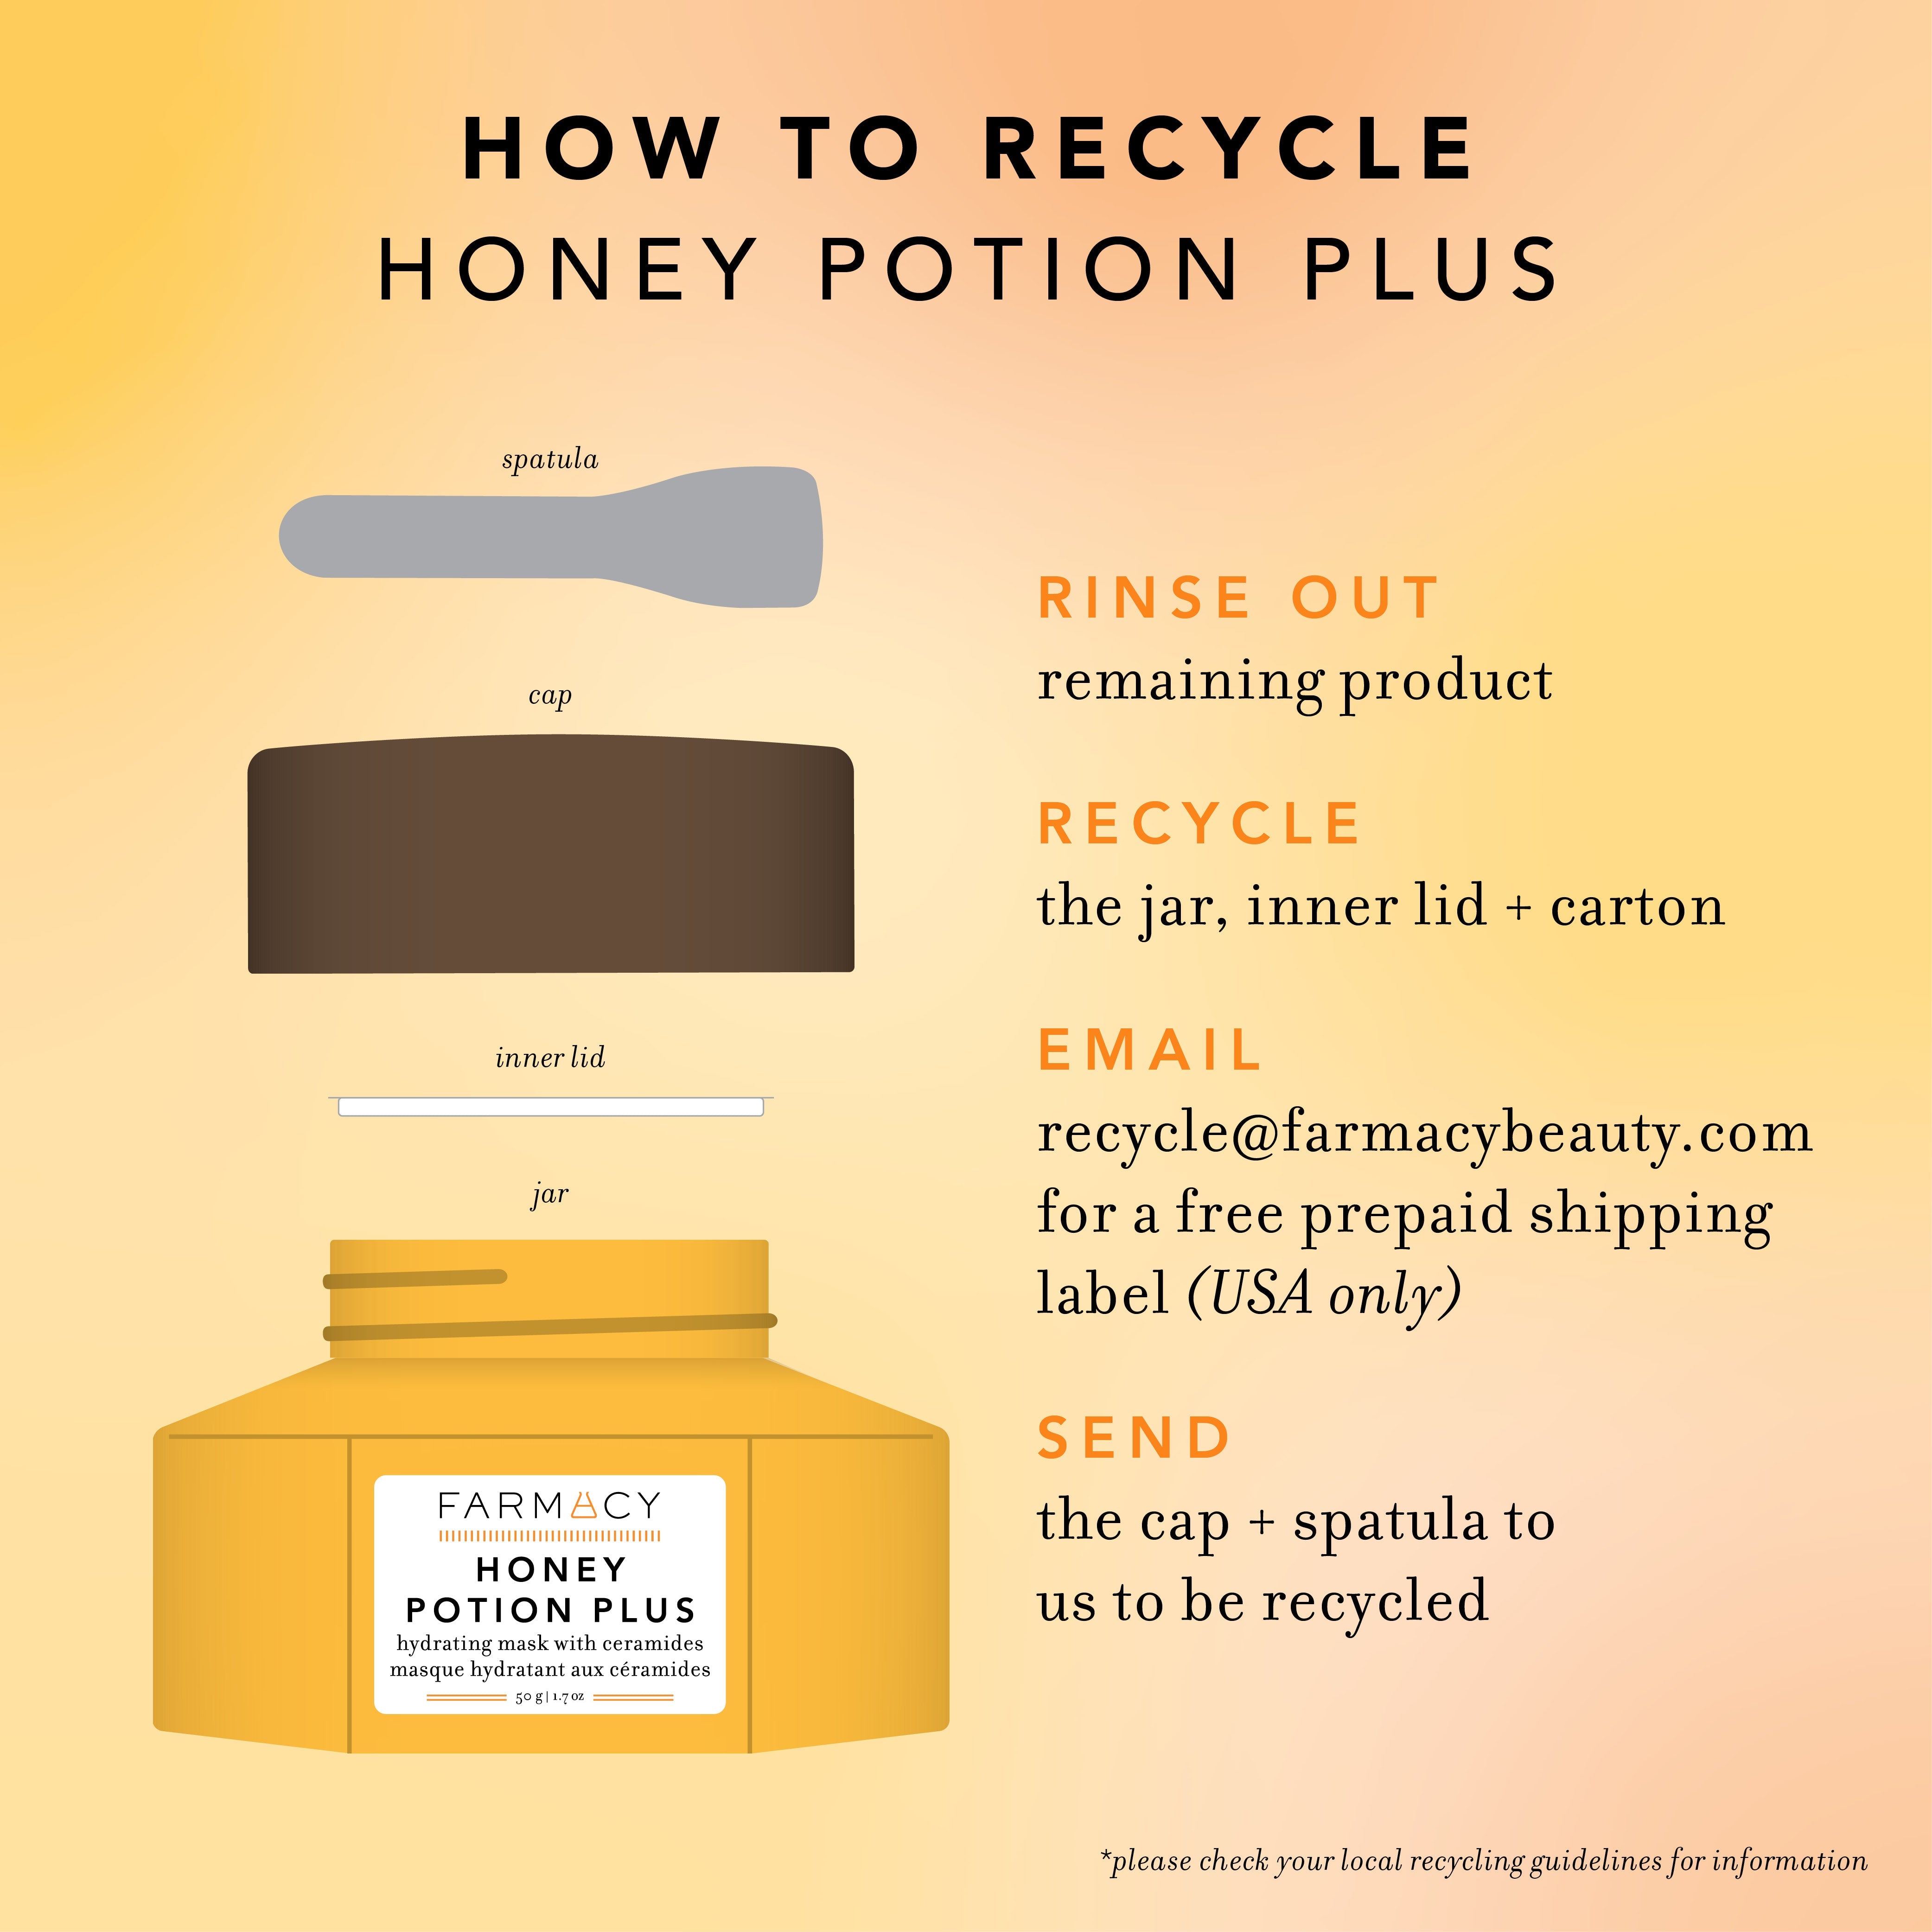 How to use Honey Potion Plus